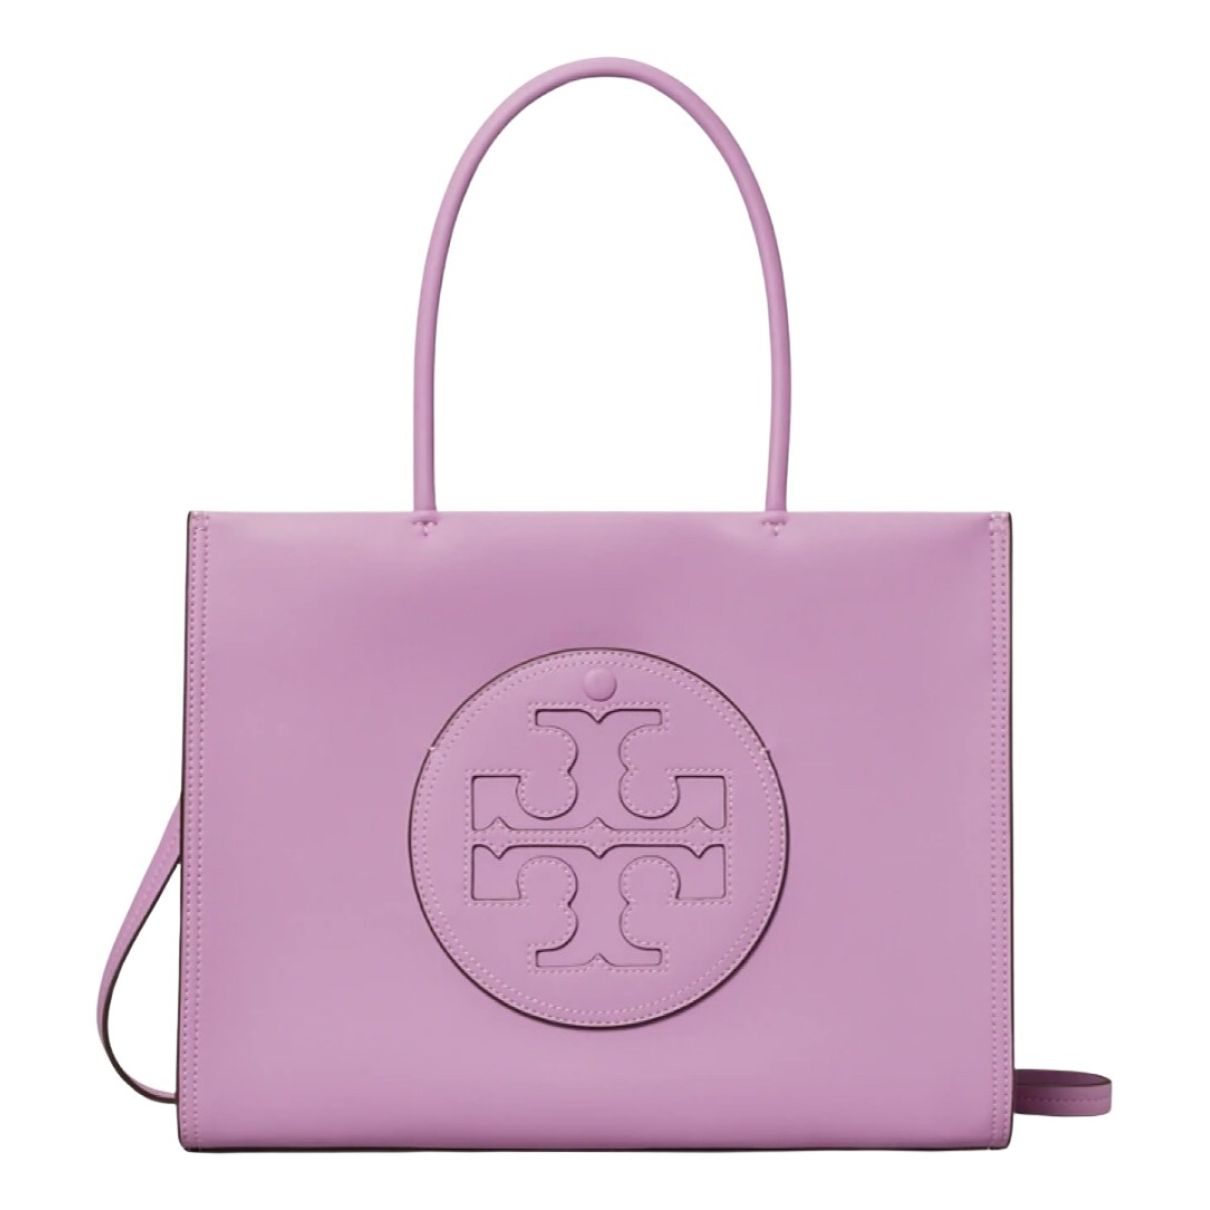 Tory Burch Handbag | Buy or Sell Tory Burch Tote bags for women - Vestiaire  Collective